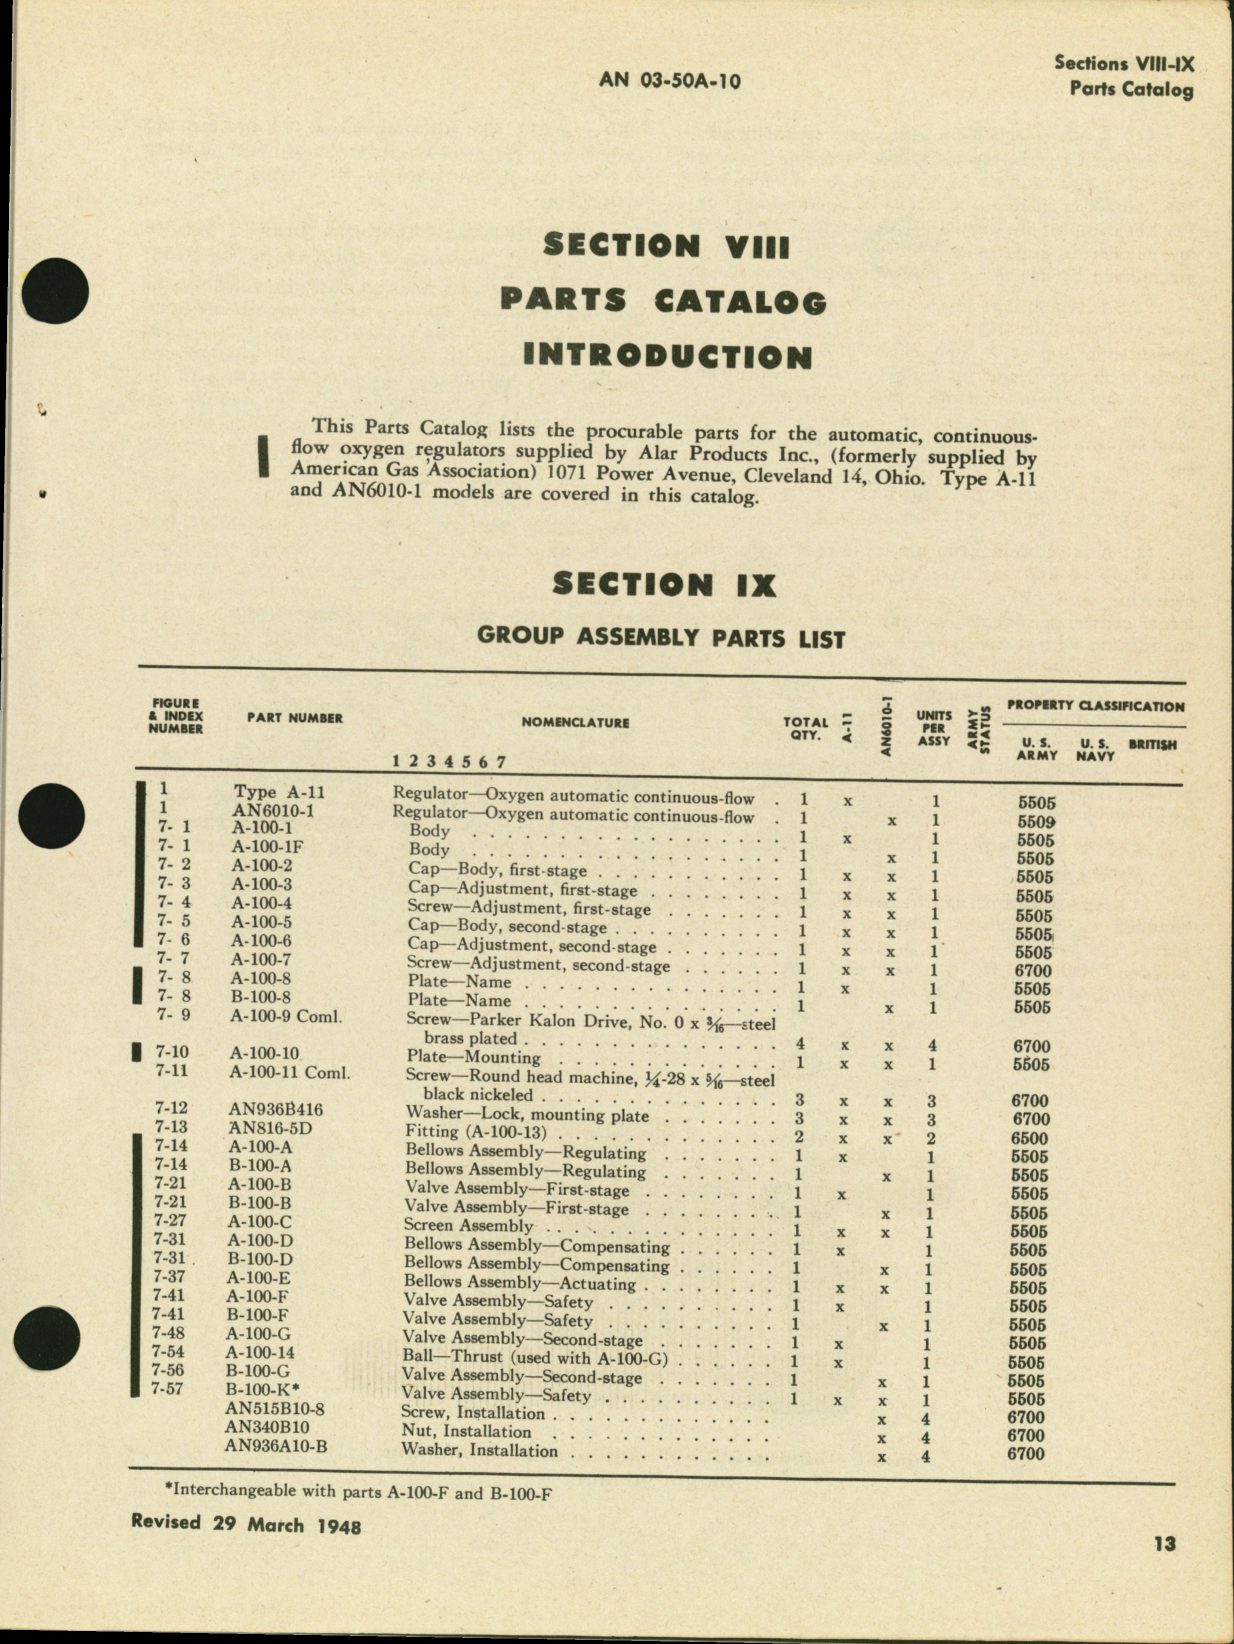 Sample page 5 from AirCorps Library document: Handbook of Operation, Service, and Overhaul Instructions with Parts Catalog for Oxygen Regulators